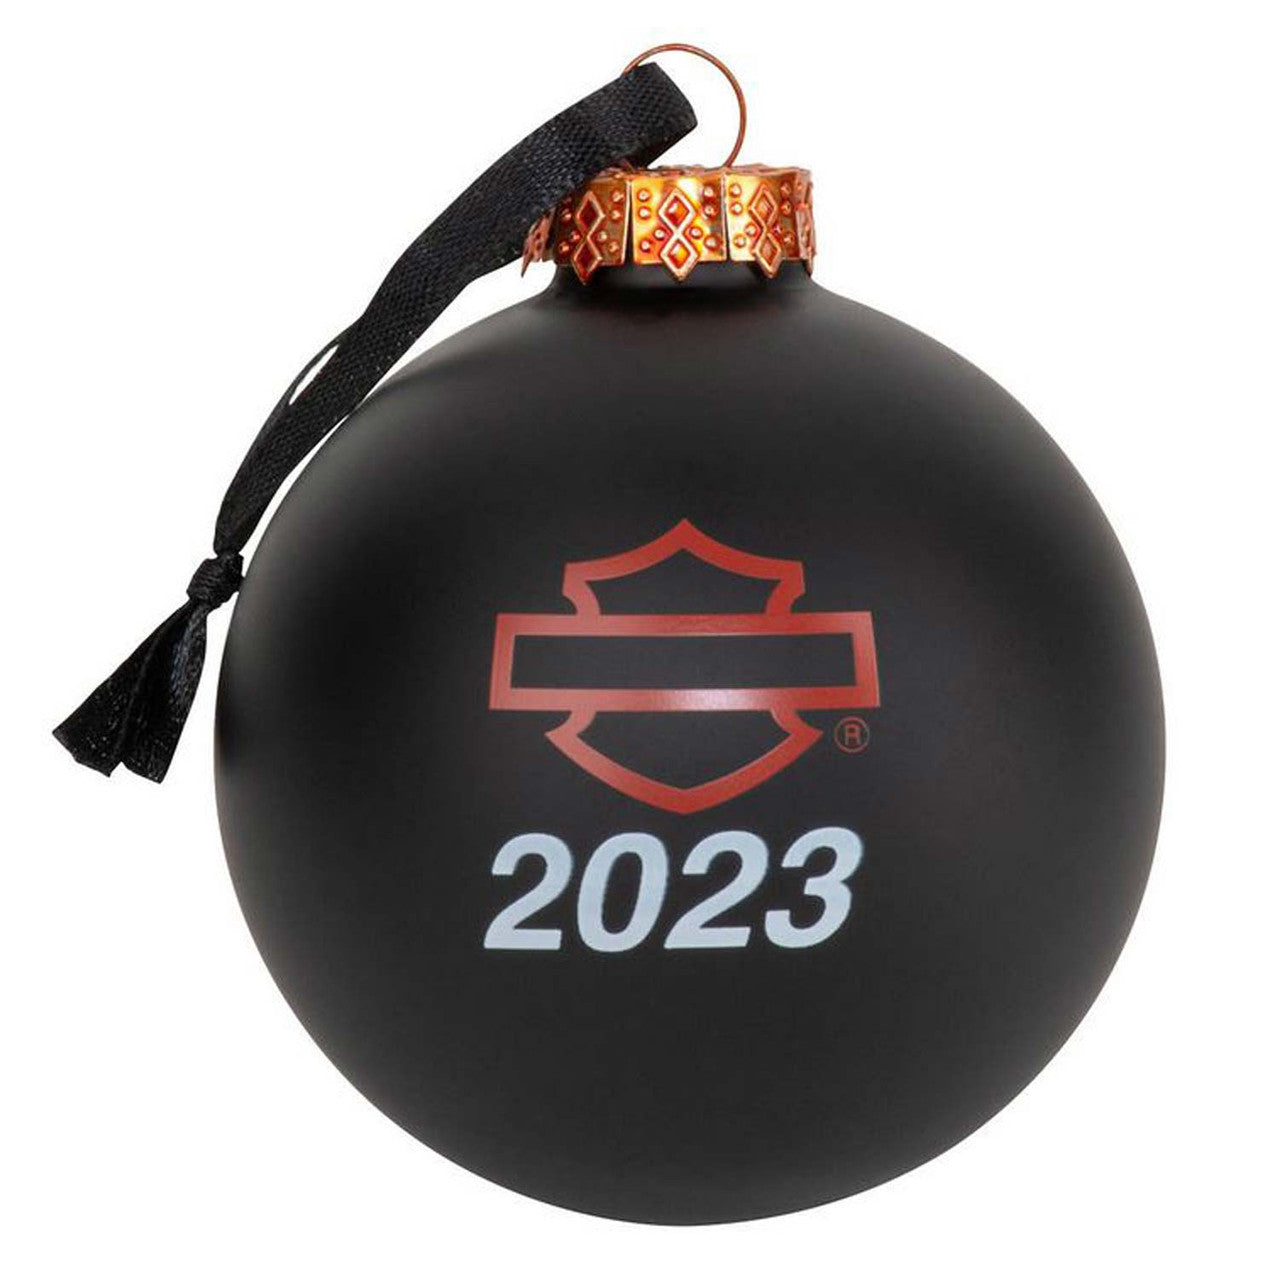 Harley-Davidson® 2023 Racing Ball Ornament | Dated 2023 For Collectors